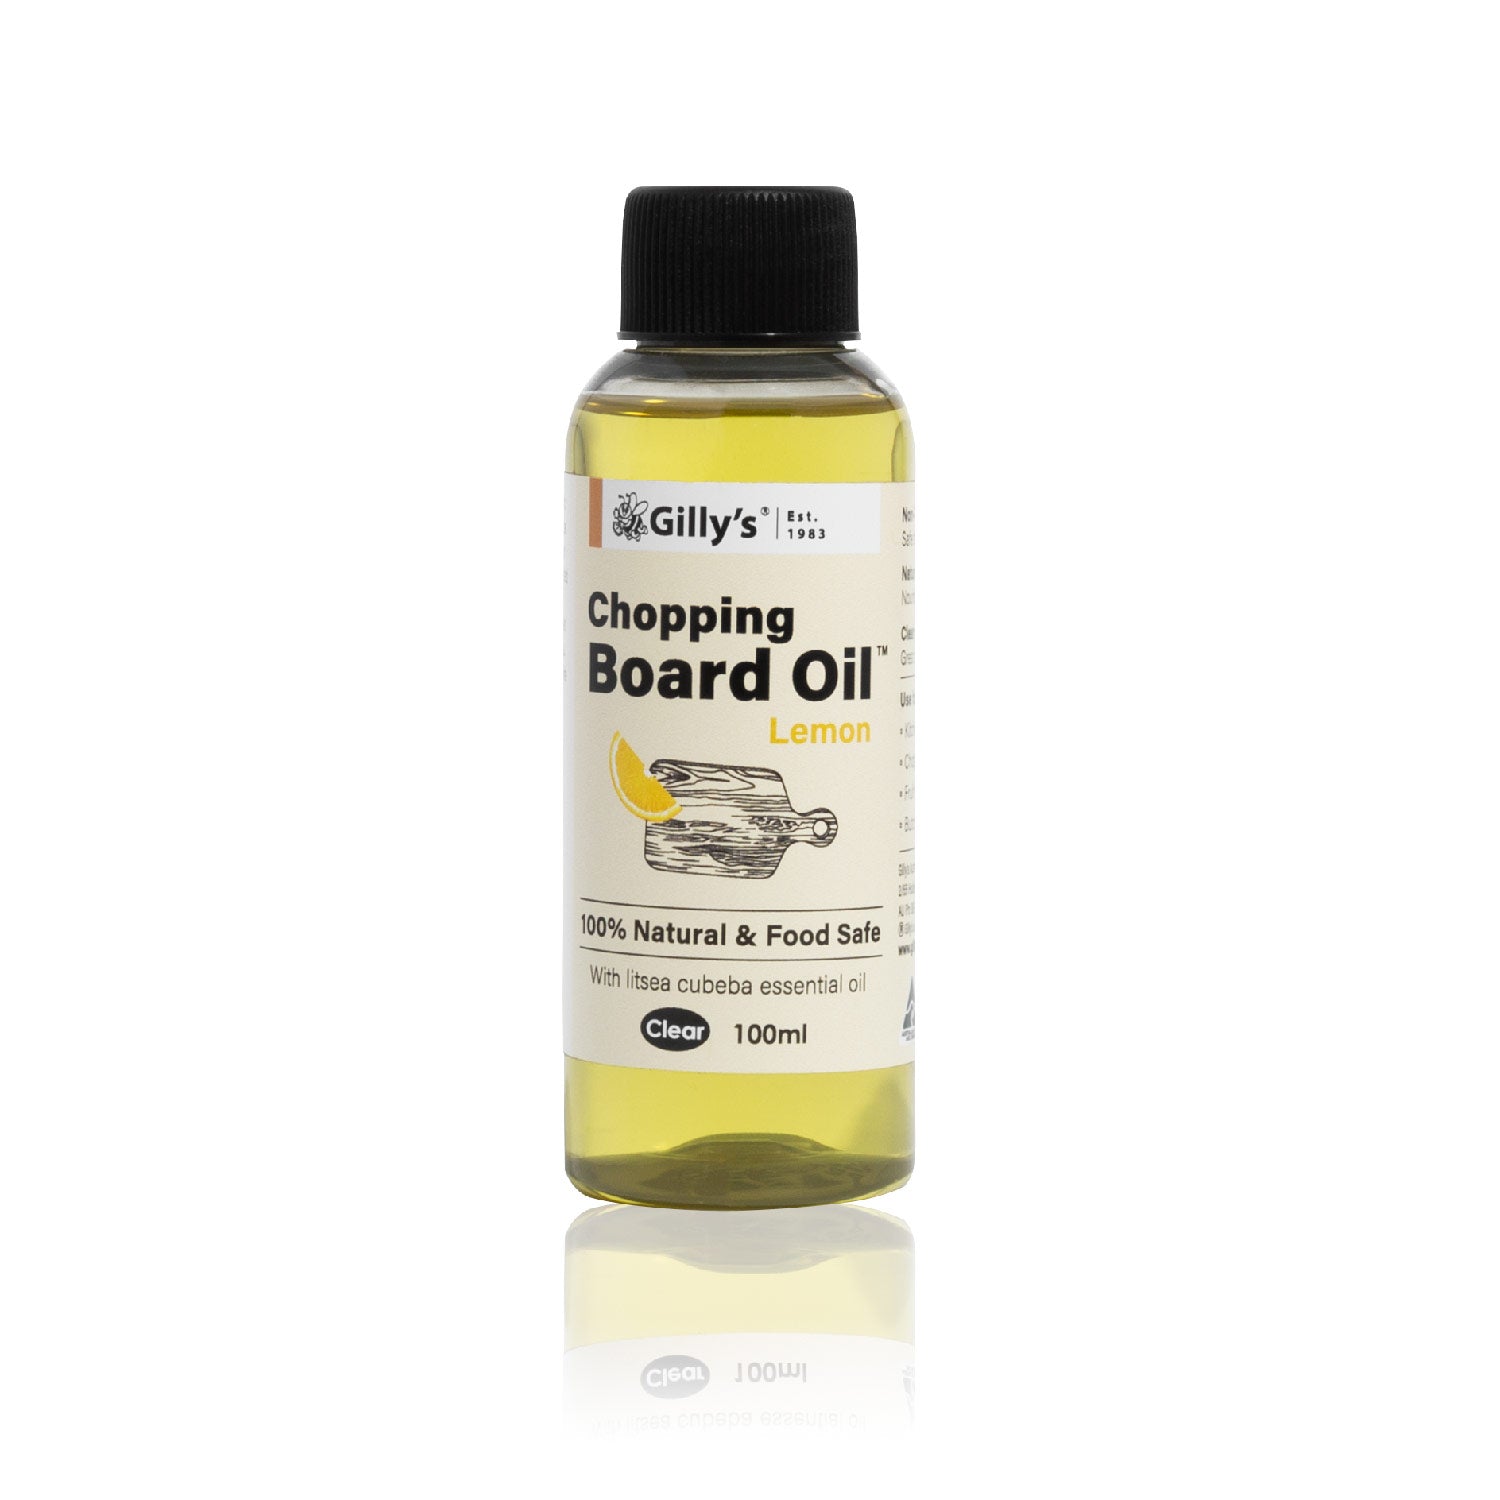 Chopping Board Oil by Gilly's